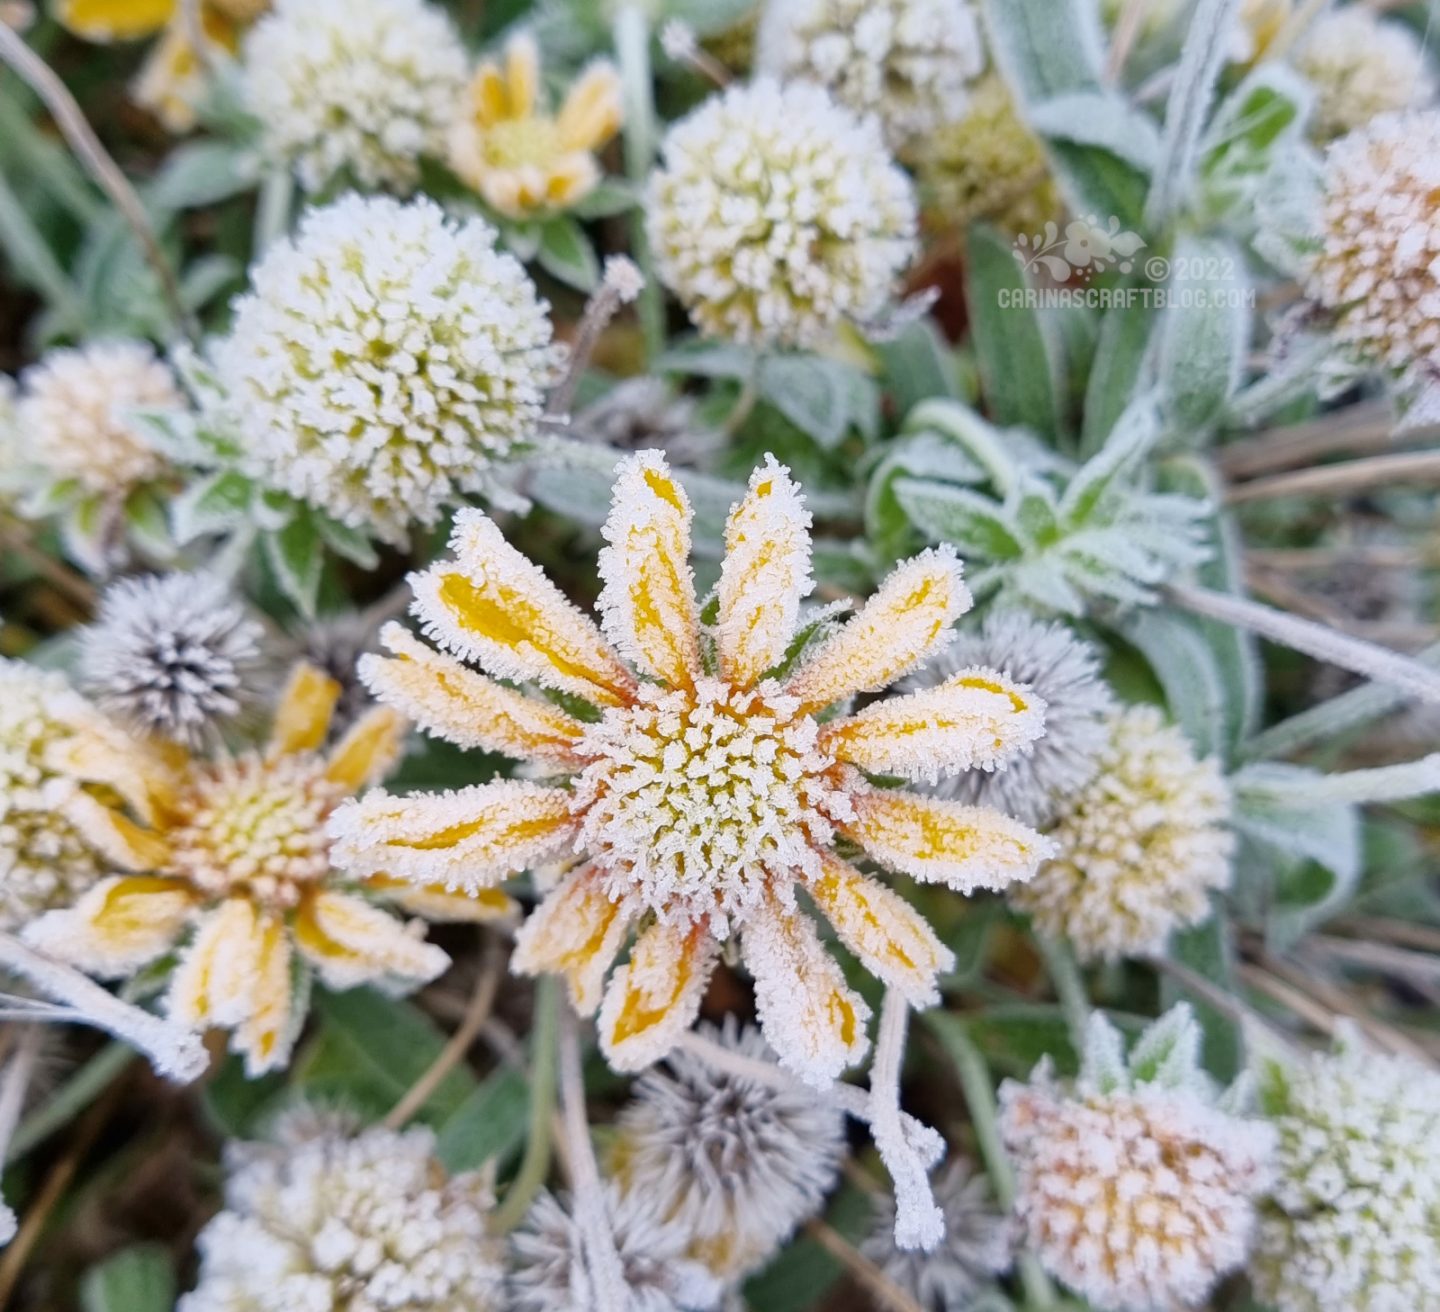 Large yellow daisies encrusted with pearls of frost.